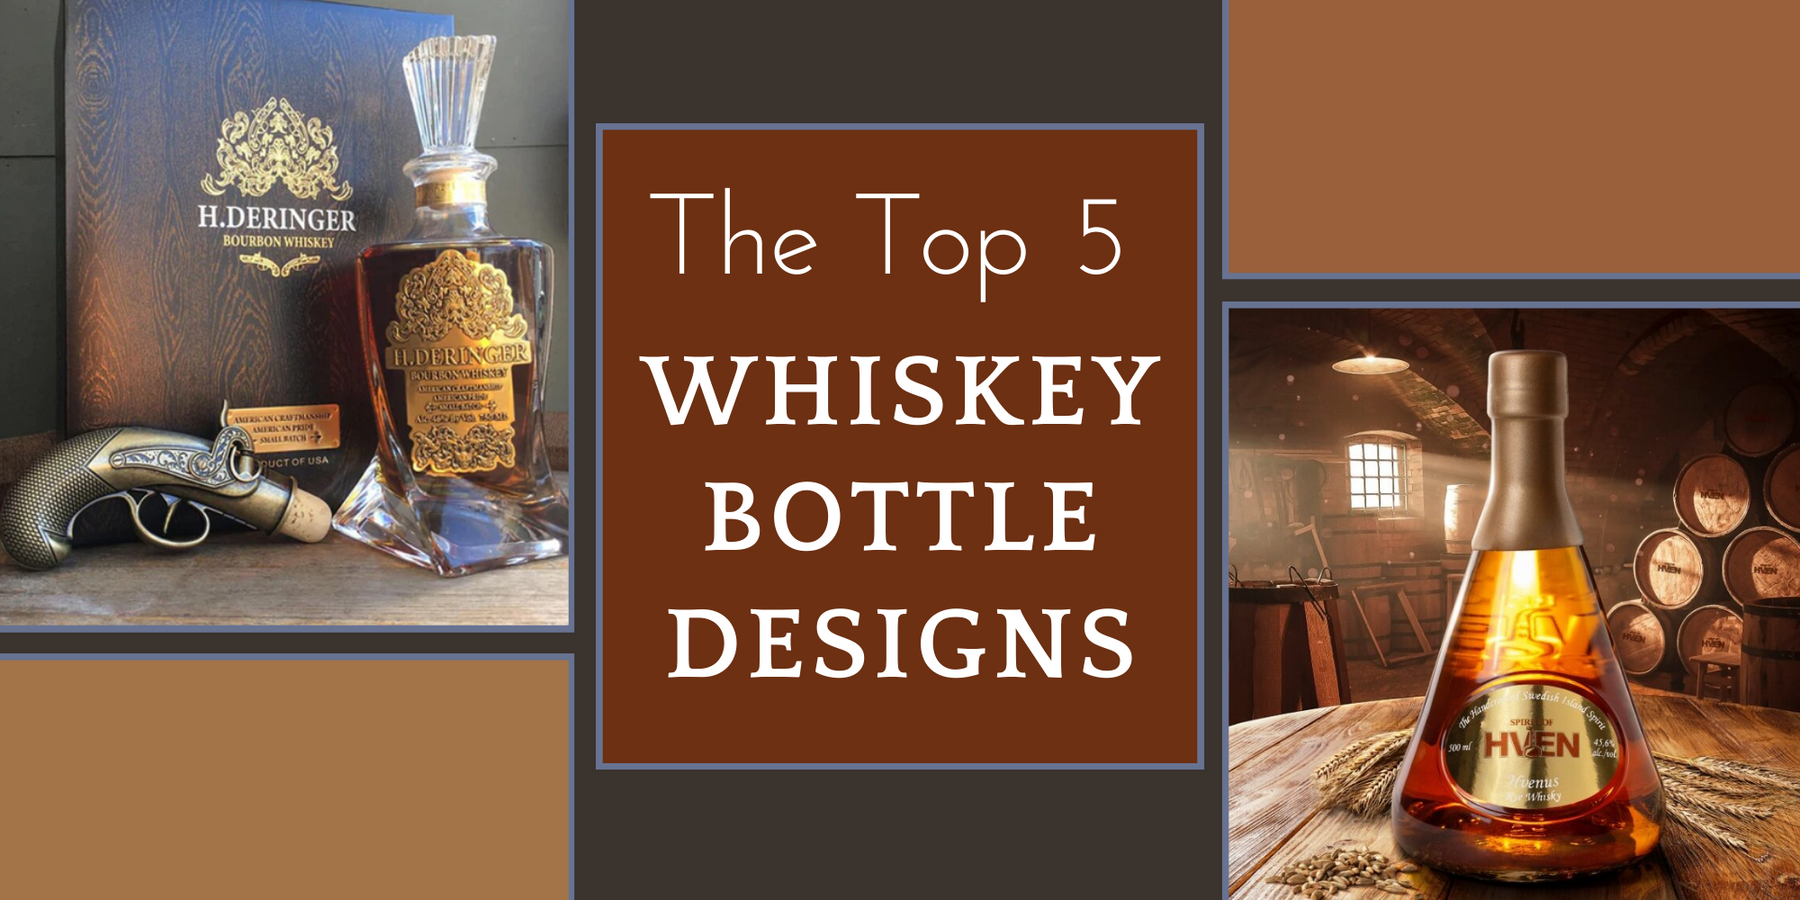 The Top 5 Whiskey Bottle Designs